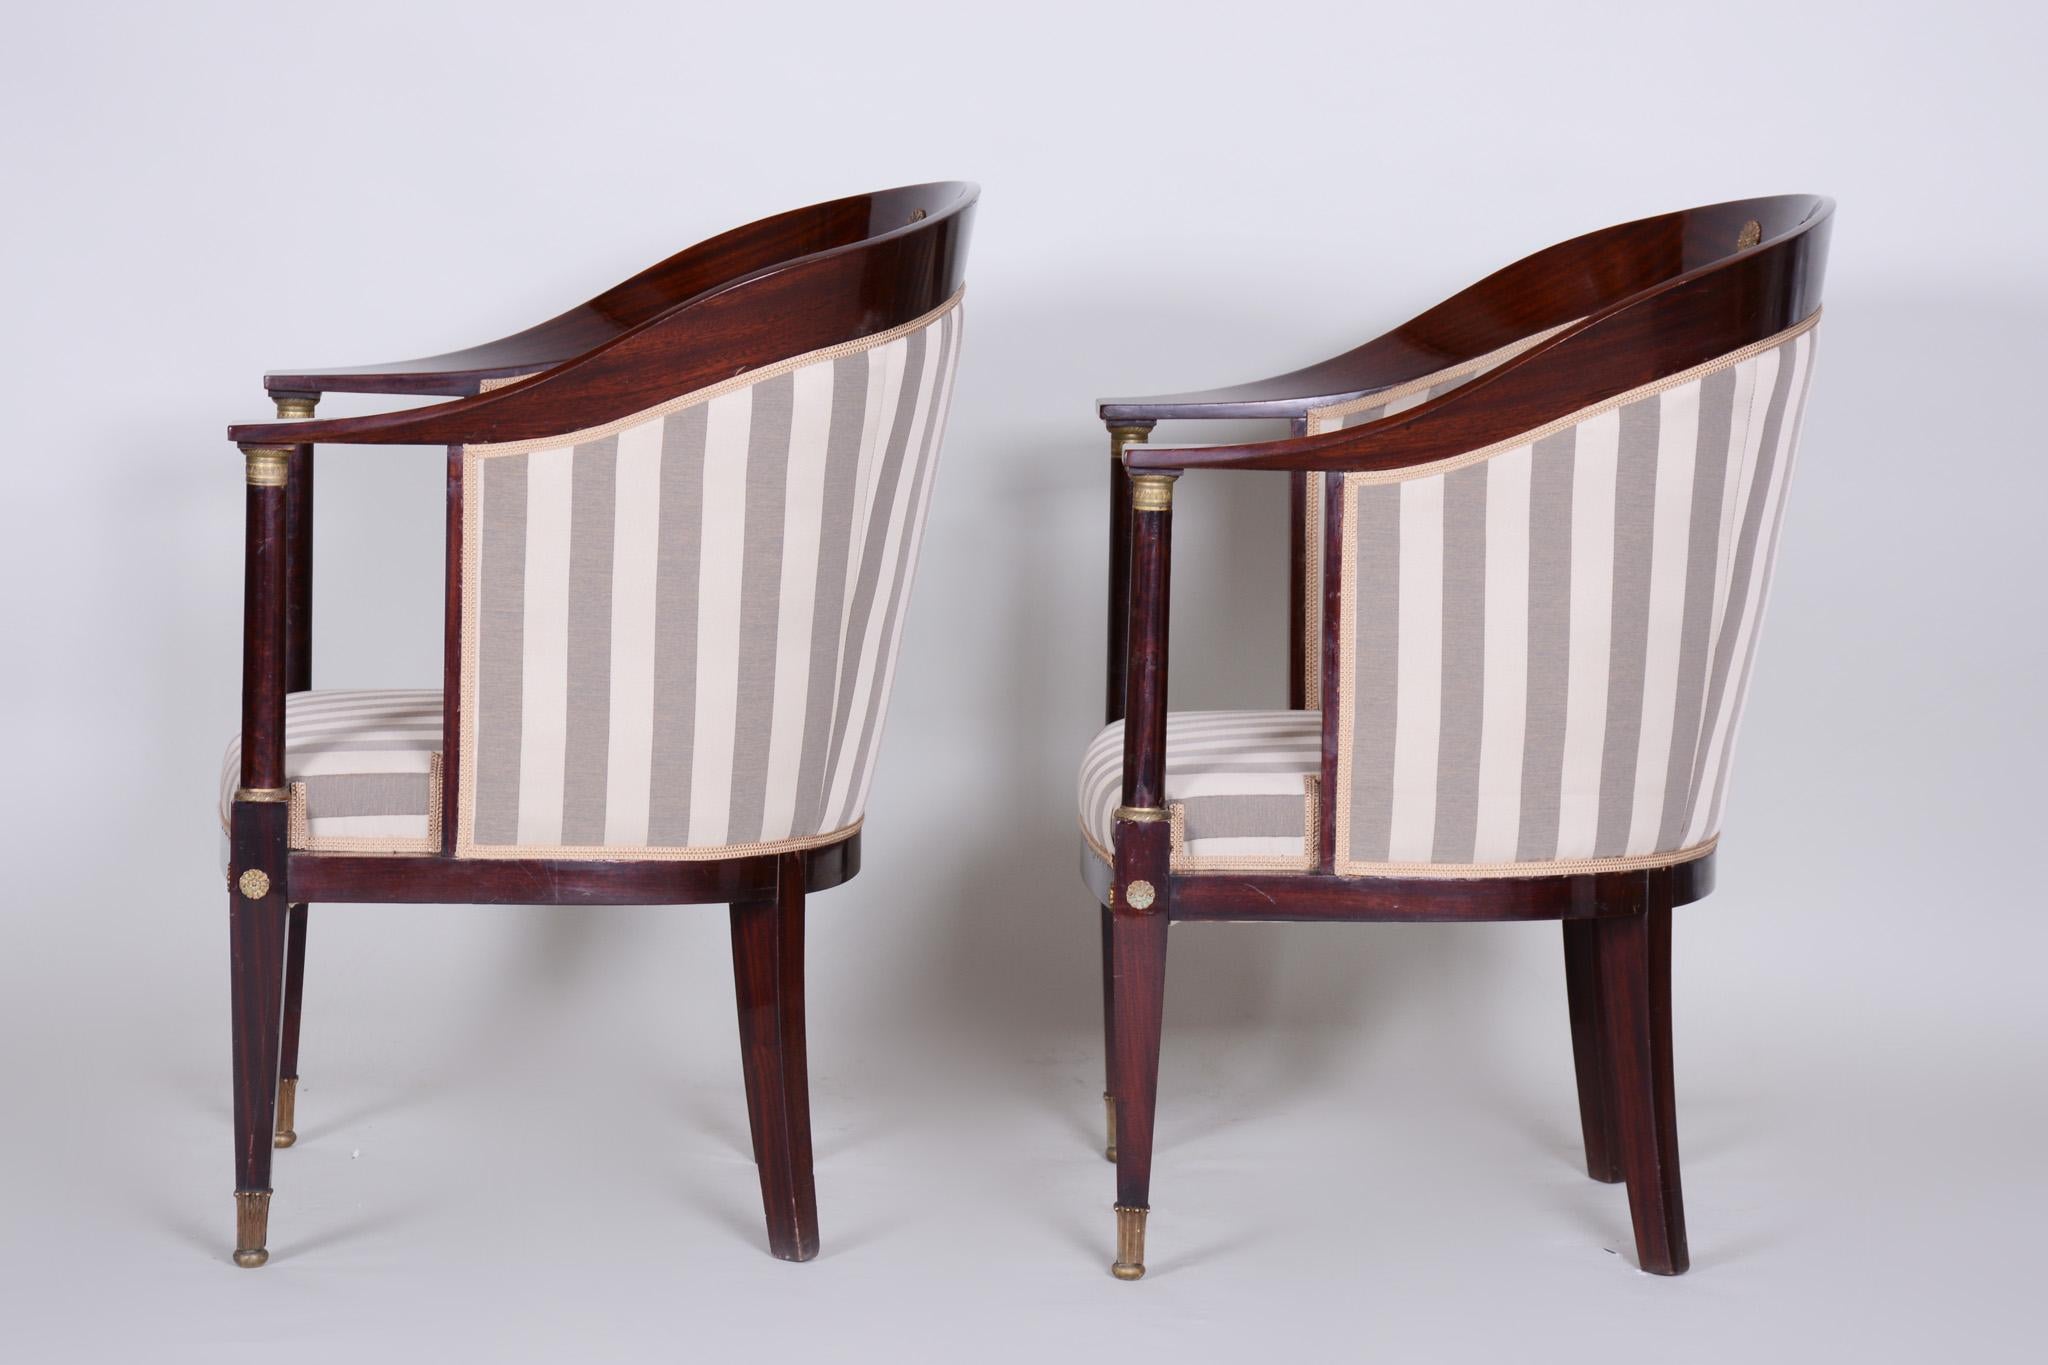 Early 19th Century Restored Empire Mahogany Living Room French Seating Set, 3pcs For Sale 10